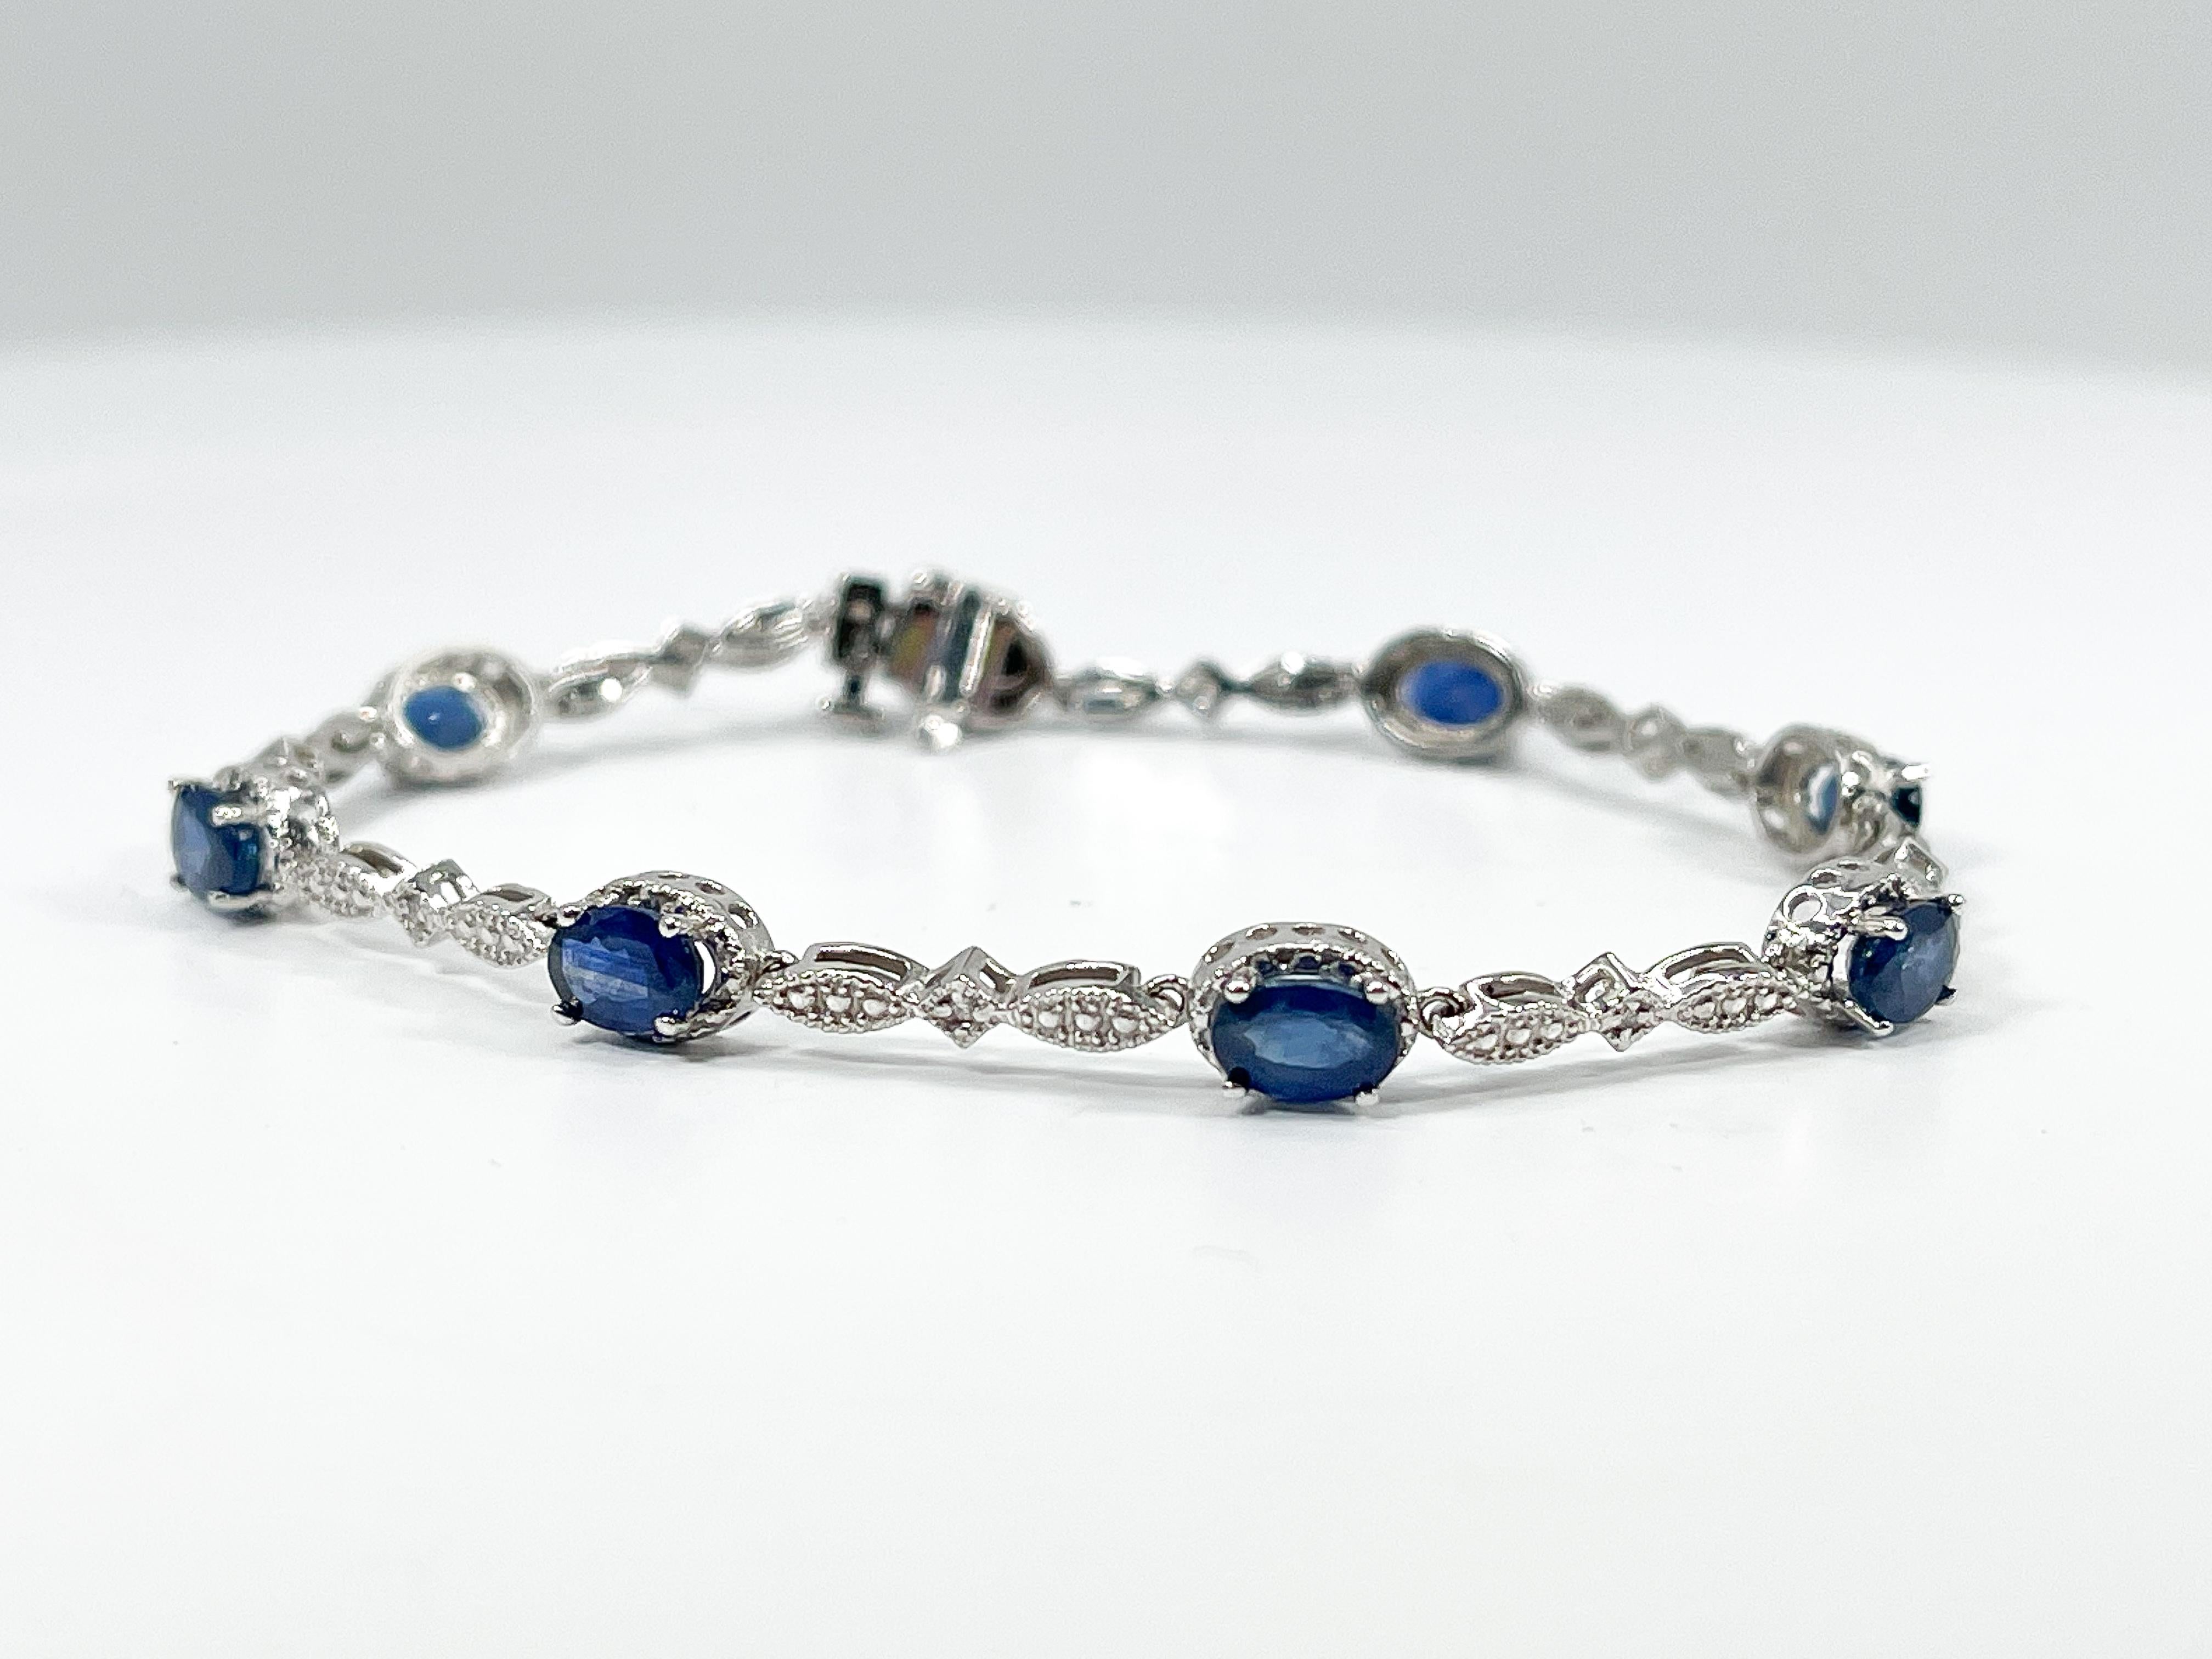 14k white gold oval 5.20 CTW sapphire and diamond line bracelet. Bracelet has 8 diamonds and 8 sapphires and a tongue clasp with a safety bar underneath. The bracelet measures 7 inches, and has a weight of 7.85